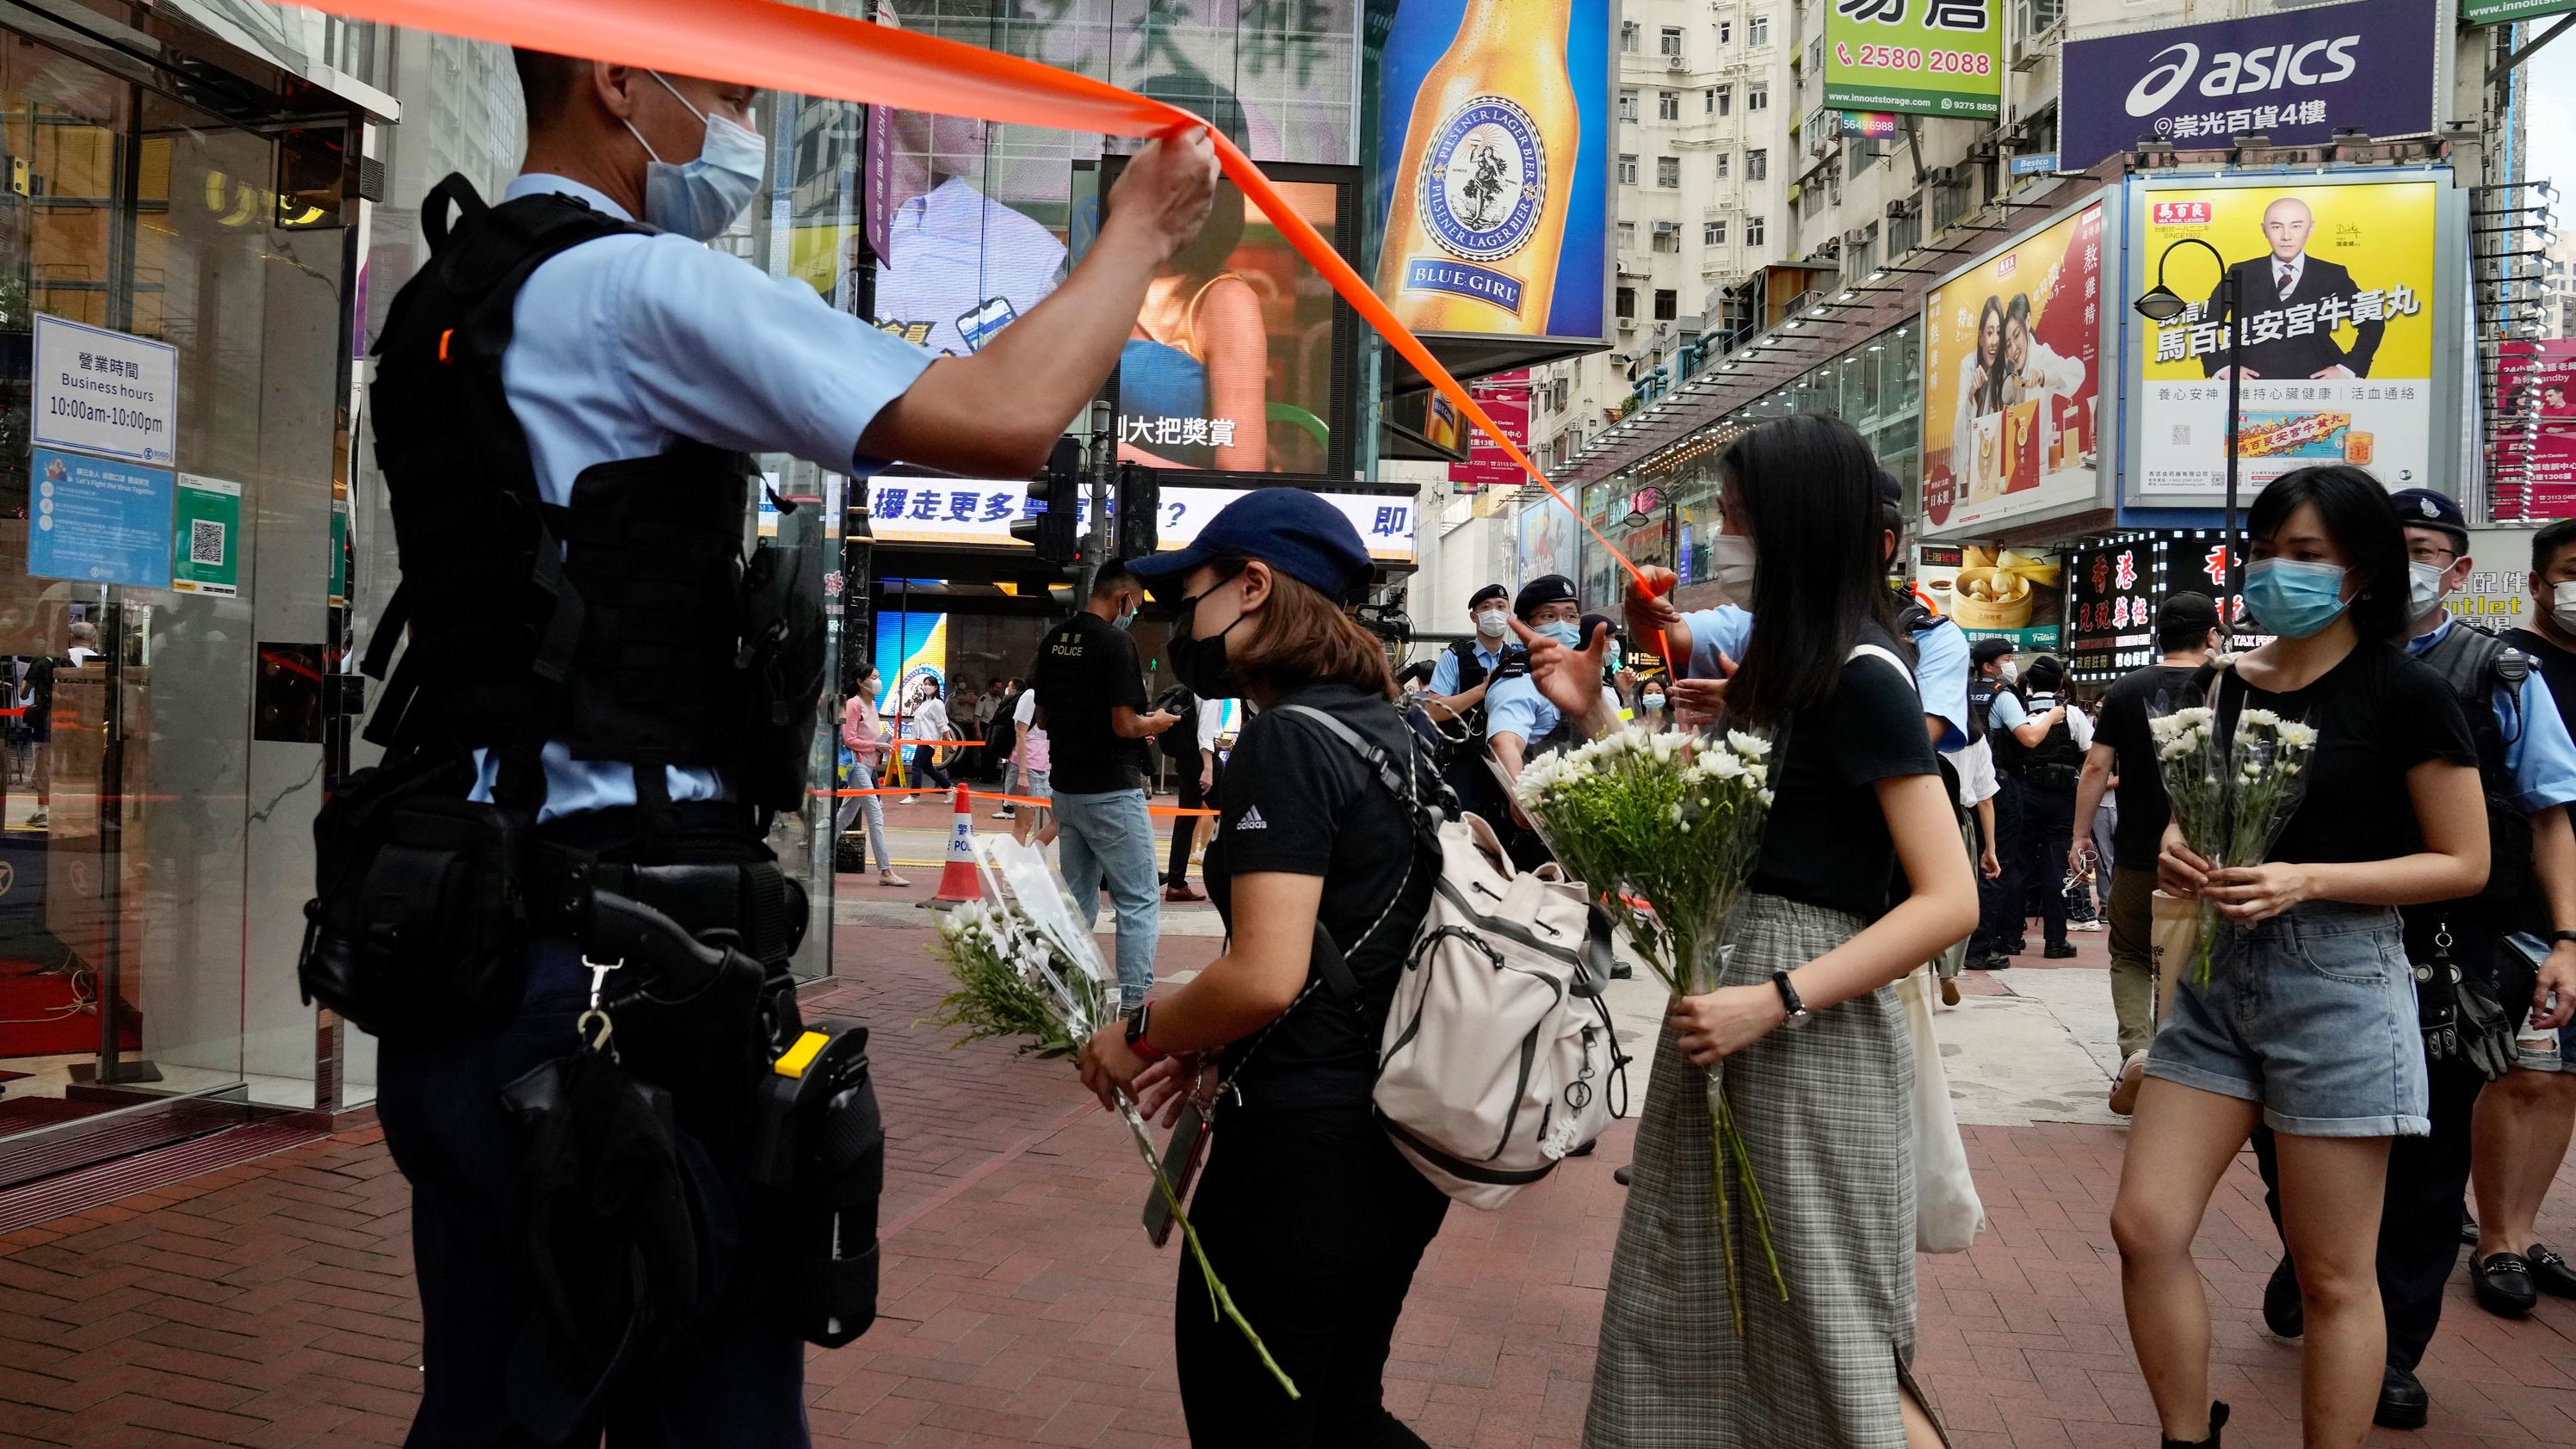 People hold flowers to mourn the death of the assailant.